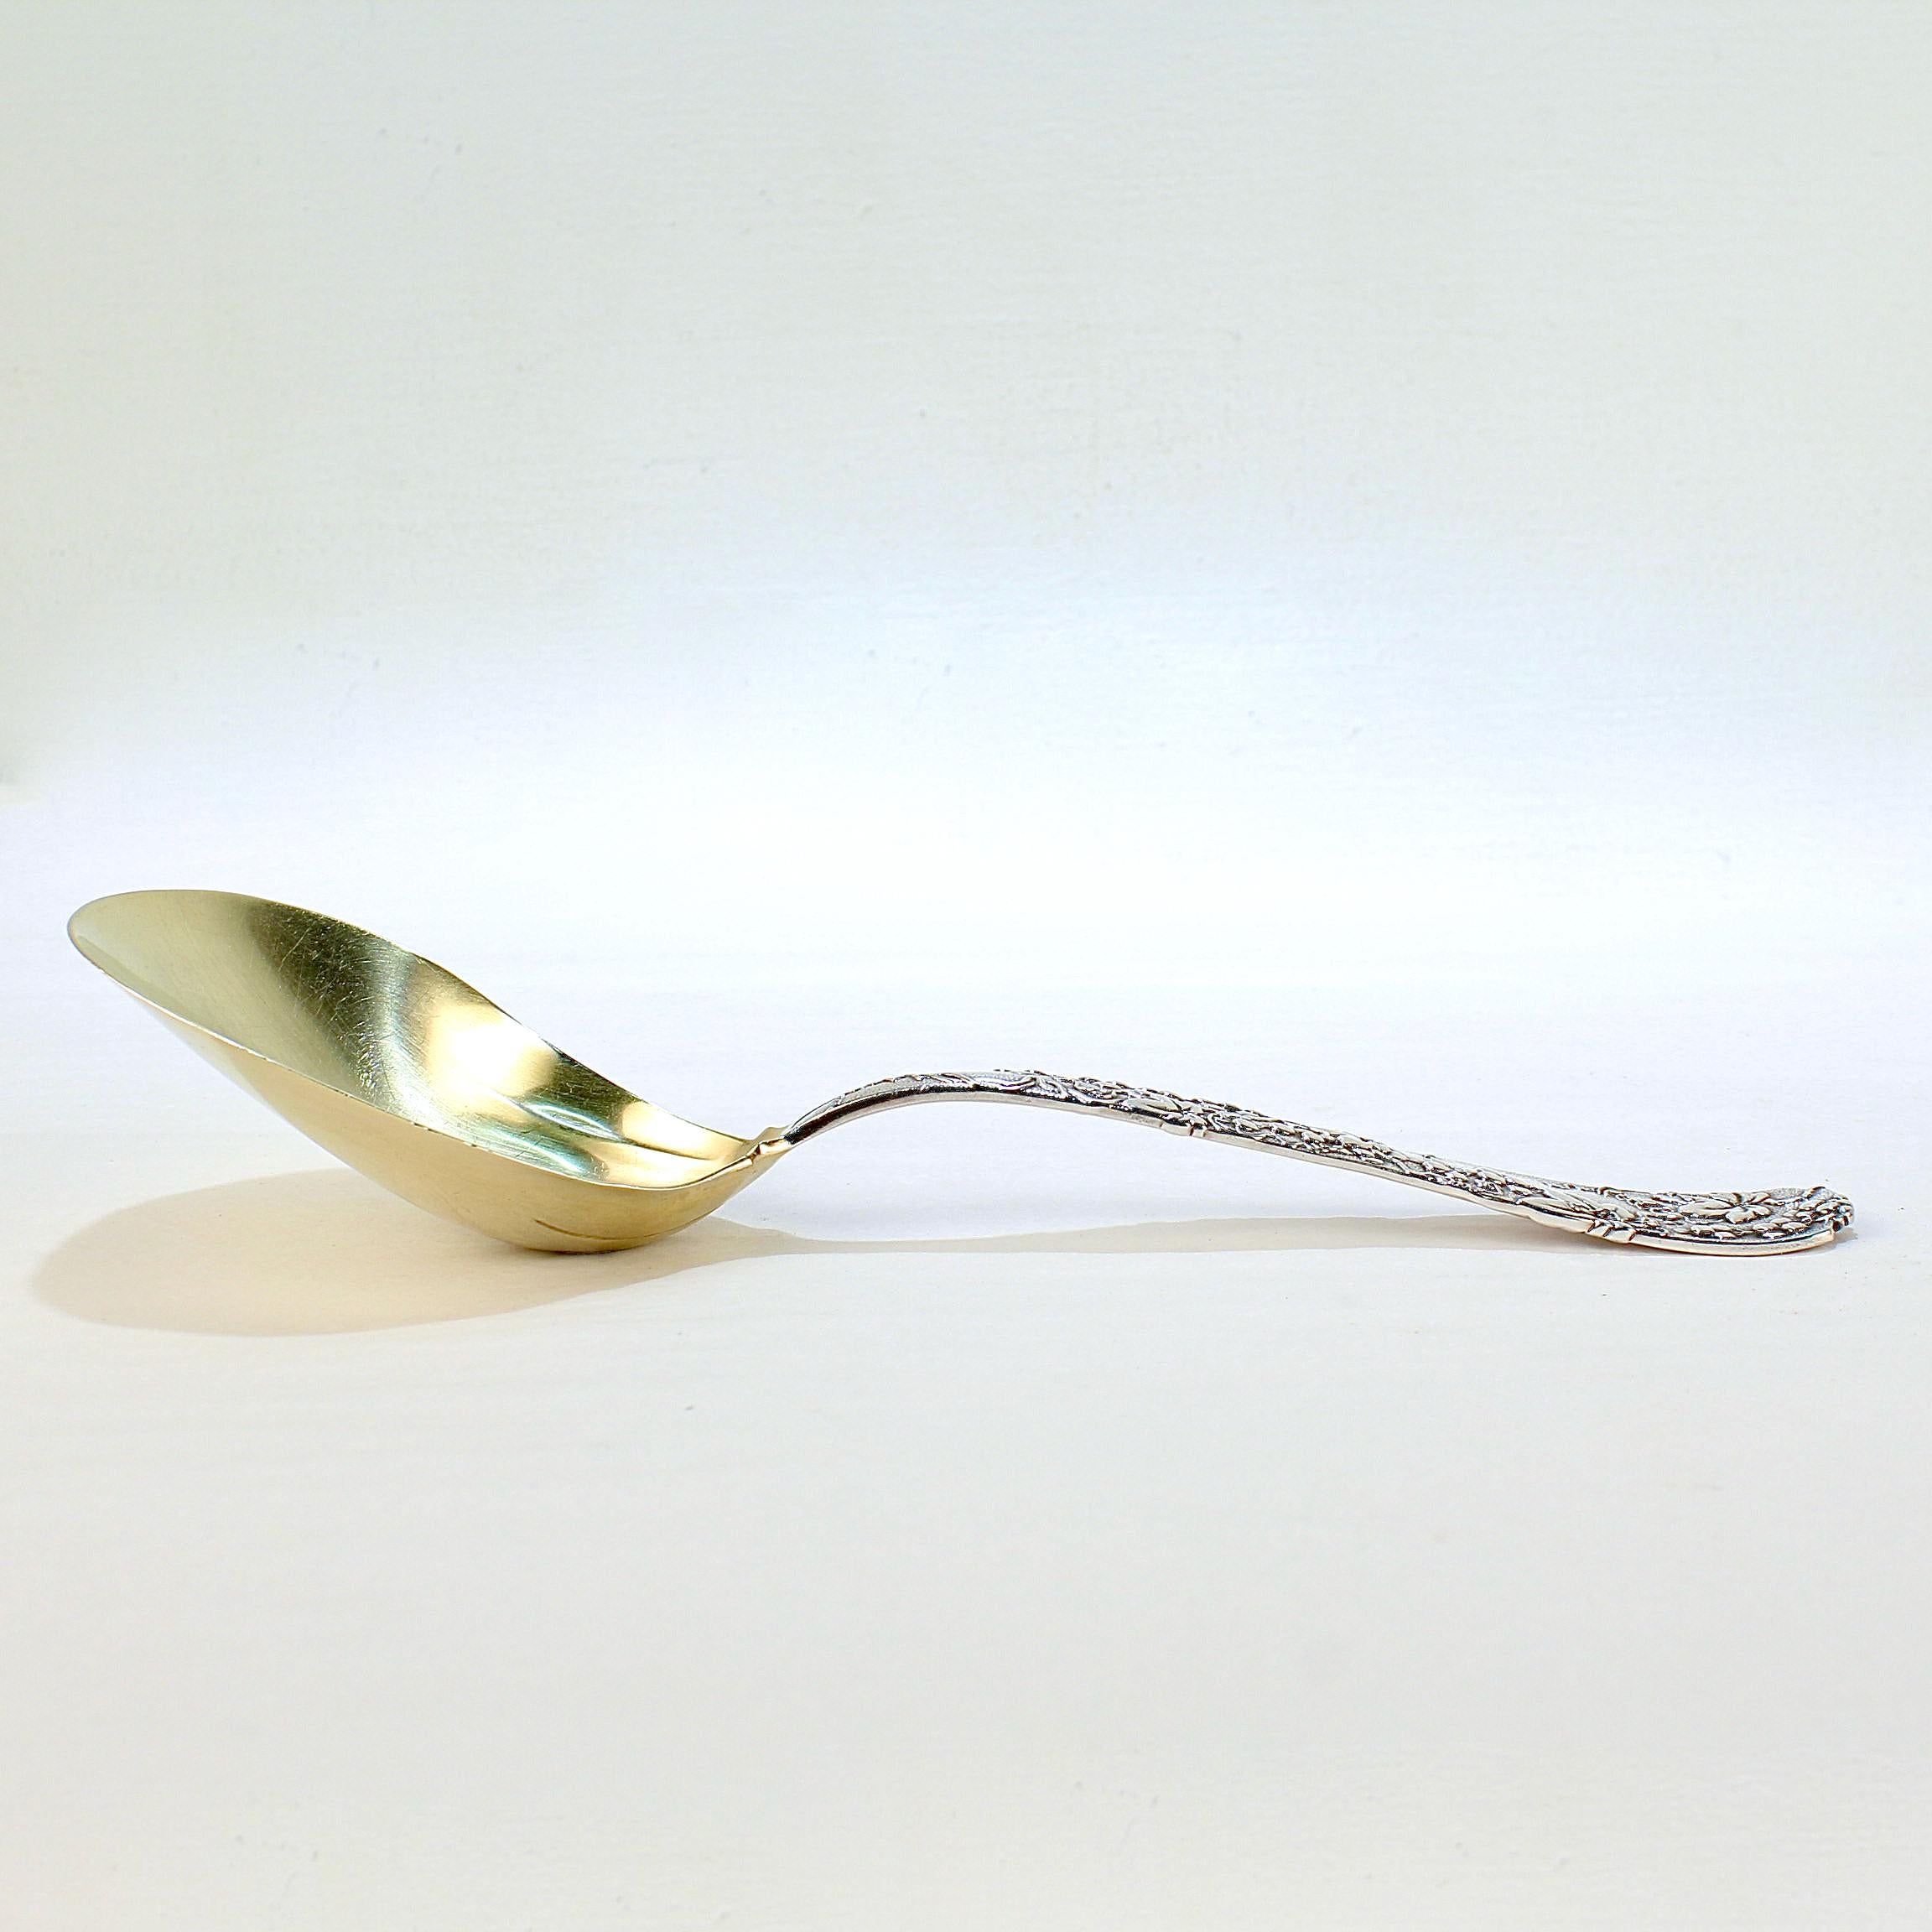 Tiffany & Co. Sterling Silver Vine Pattern Berry or Serving Spoon For Sale 3